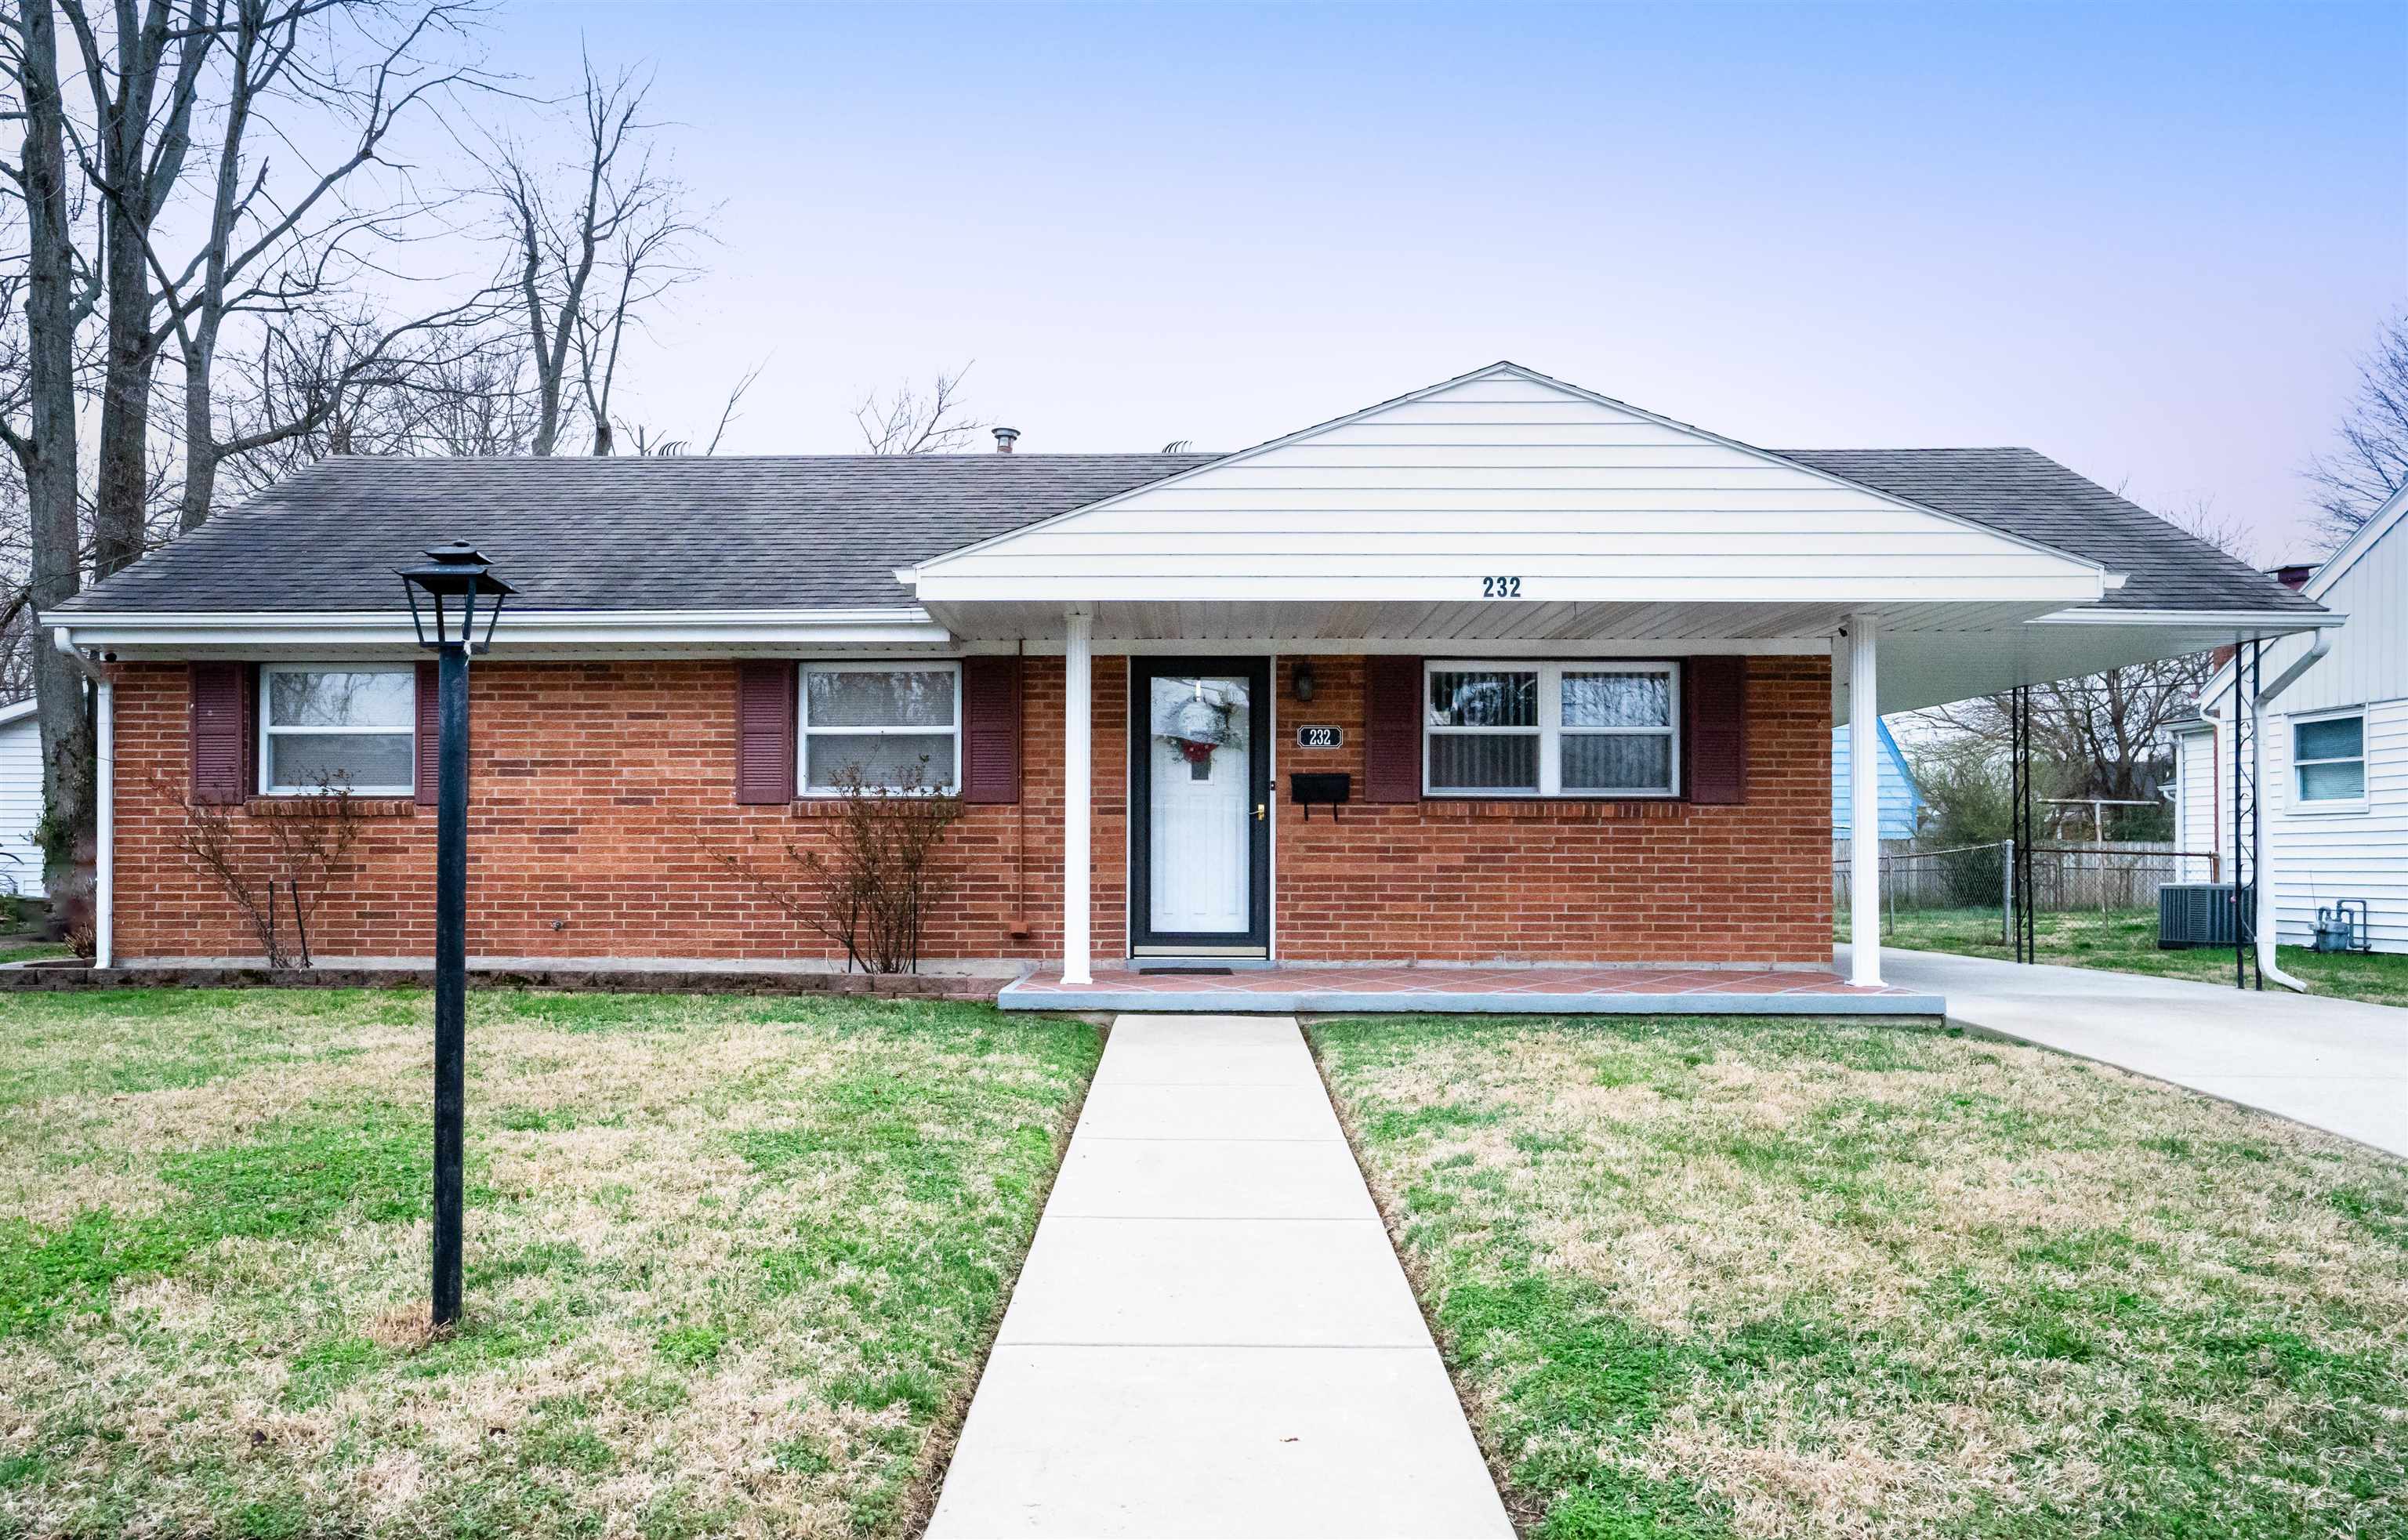 232 Longfellow Dr., Owensboro, Kentucky 42303, 3 Bedrooms Bedrooms, ,1 BathroomBathrooms,Single Family Residence,For Sale,Longfellow Dr.,89174